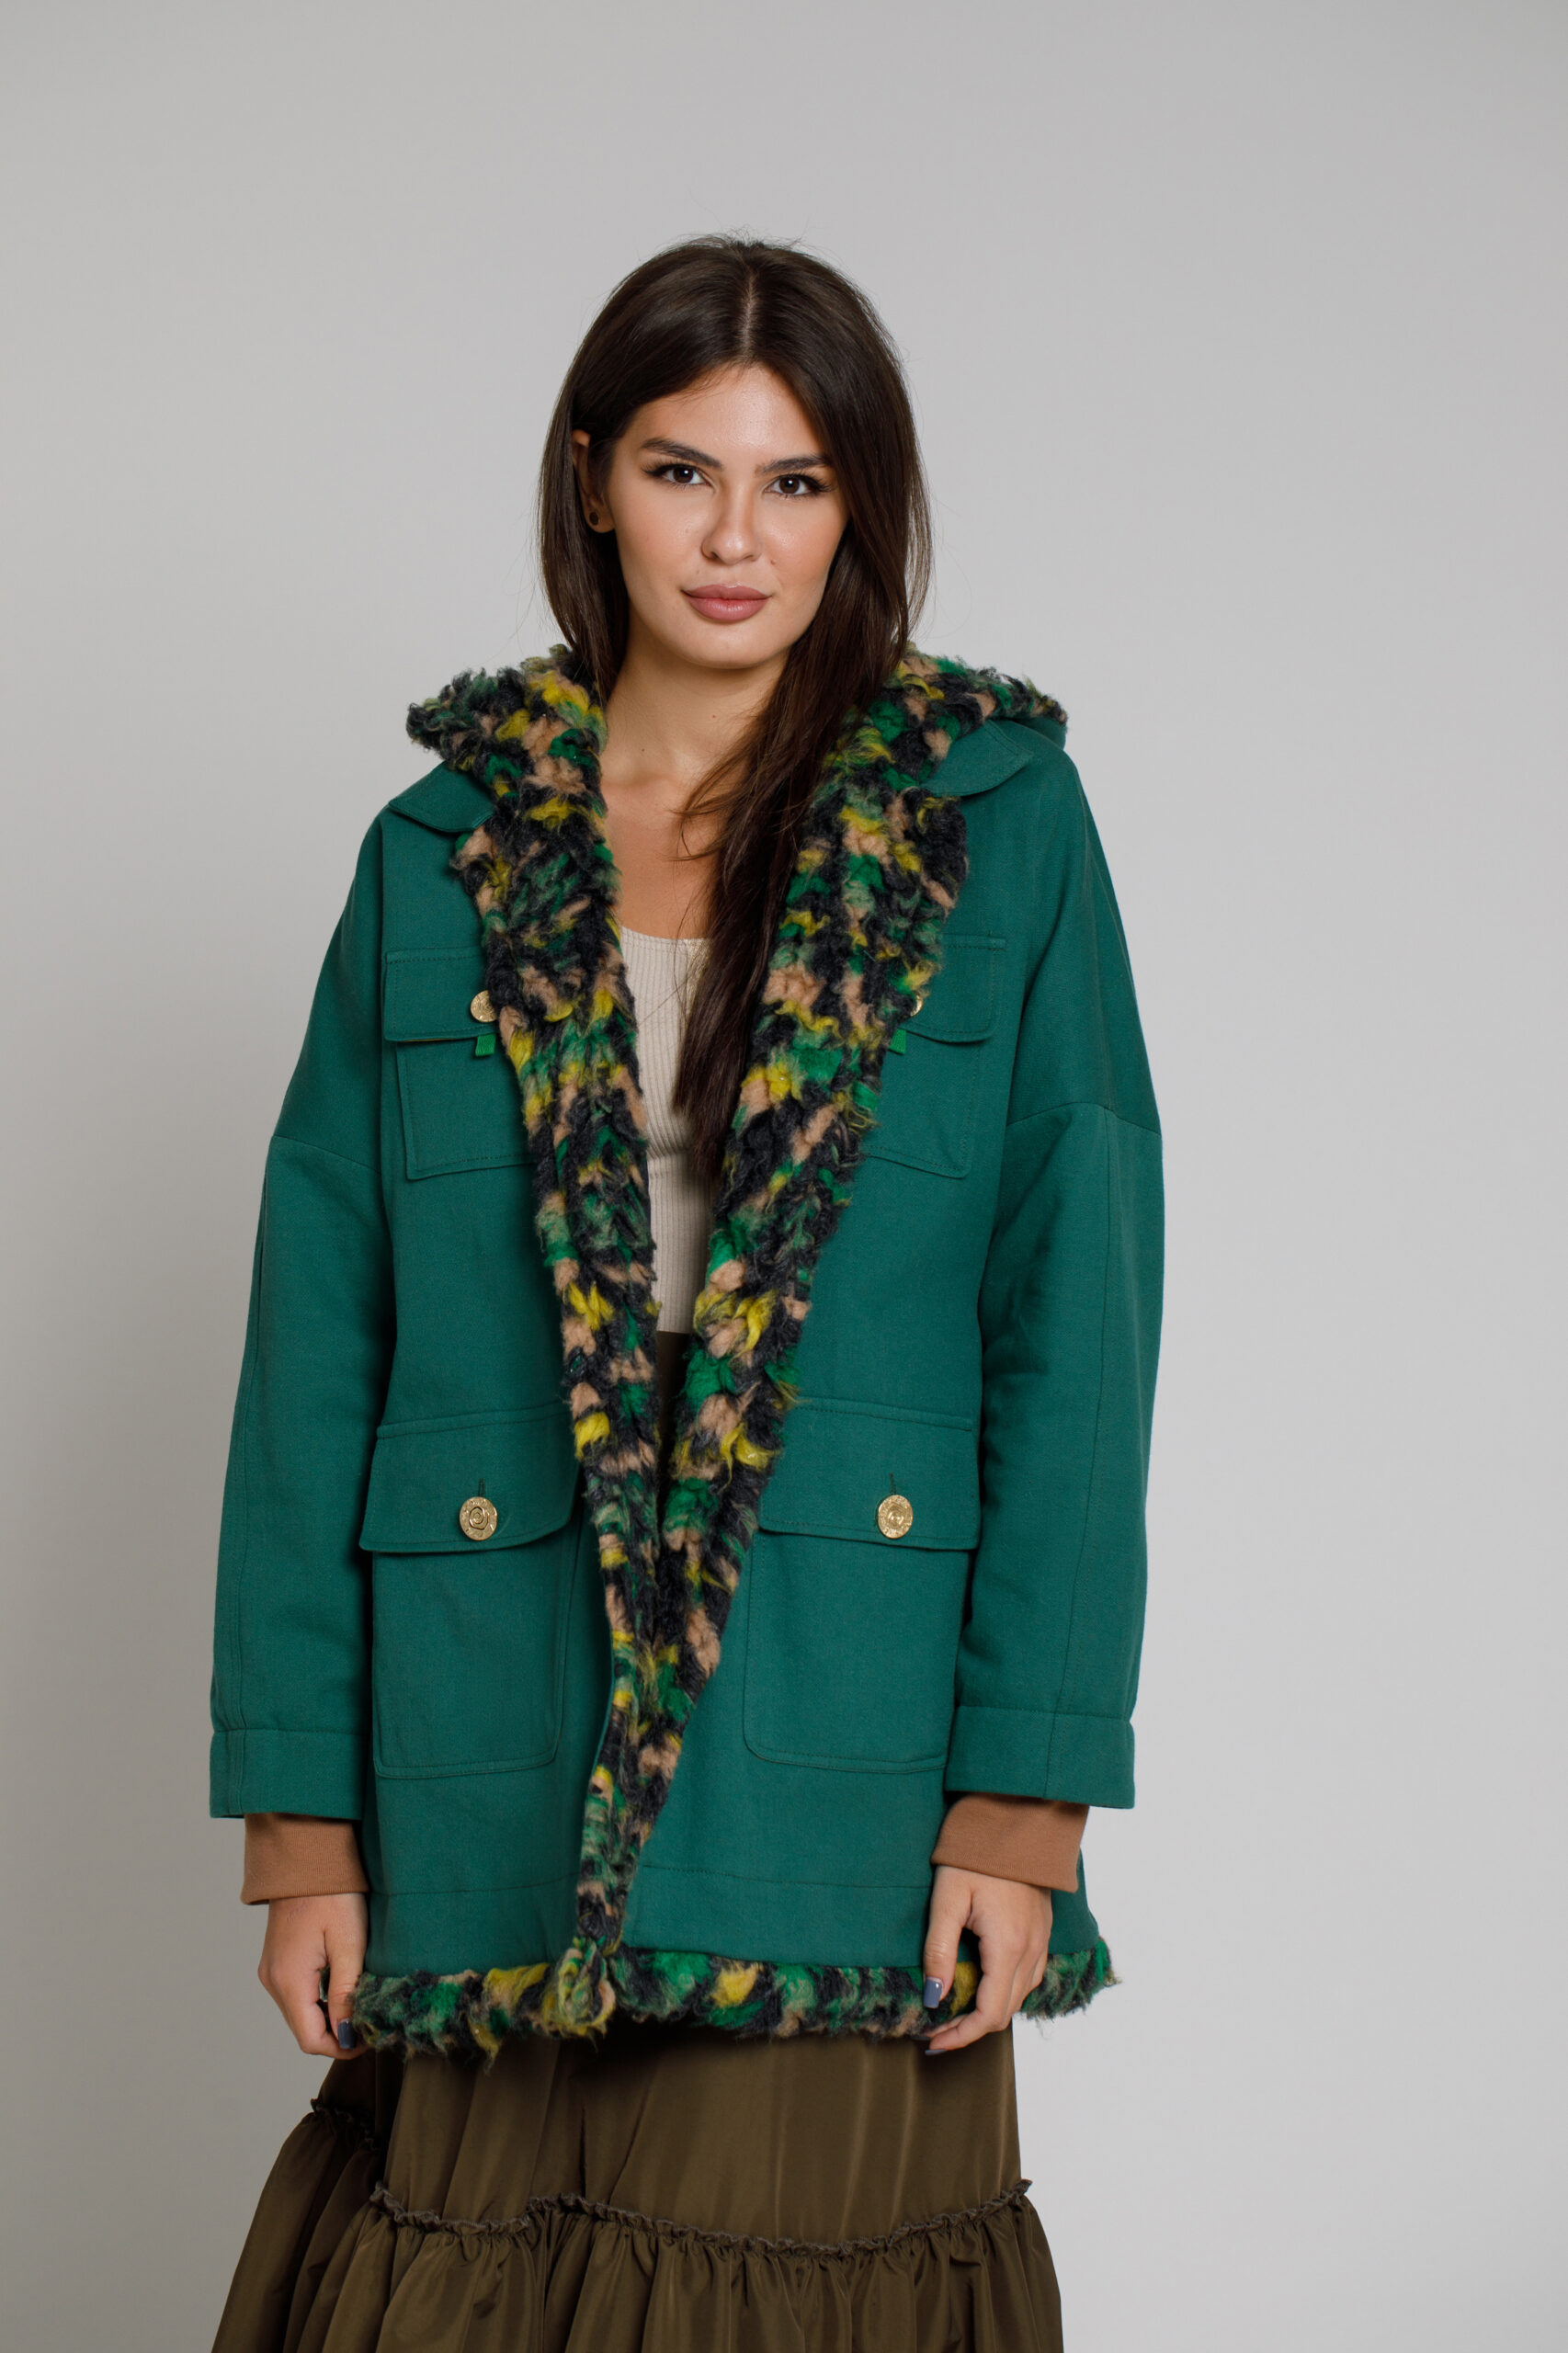 HEDONA jacket in green tercot with multicolored fur. Natural fabrics, original design, handmade embroidery